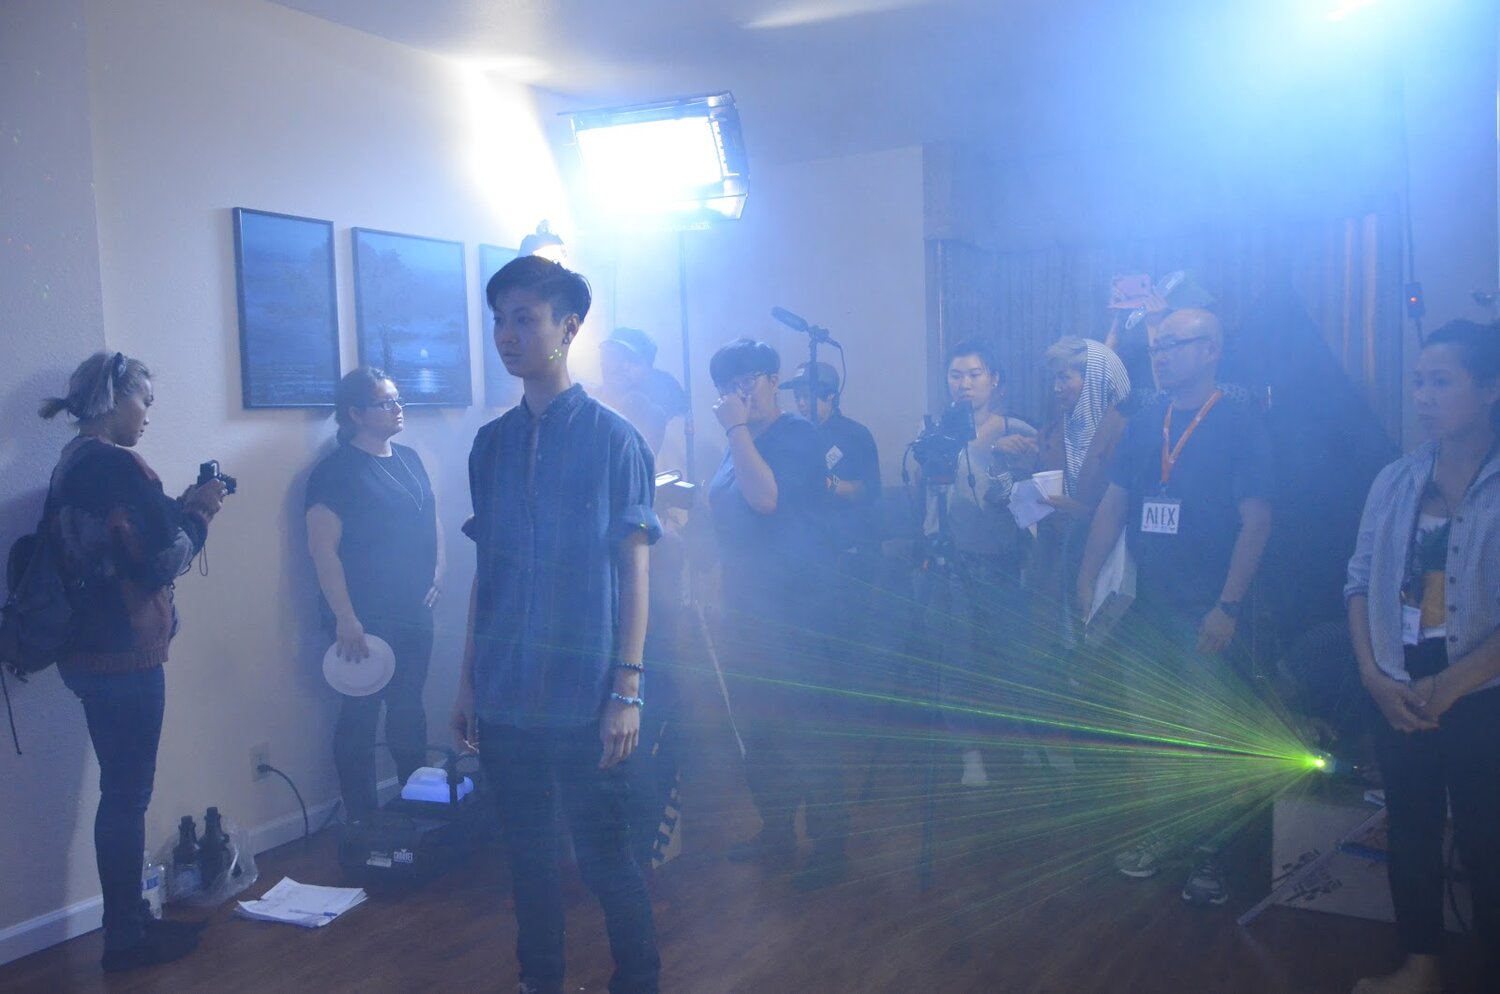  Actor Ck is standing in front of a film crew in a living room filled with fog and green lights. 